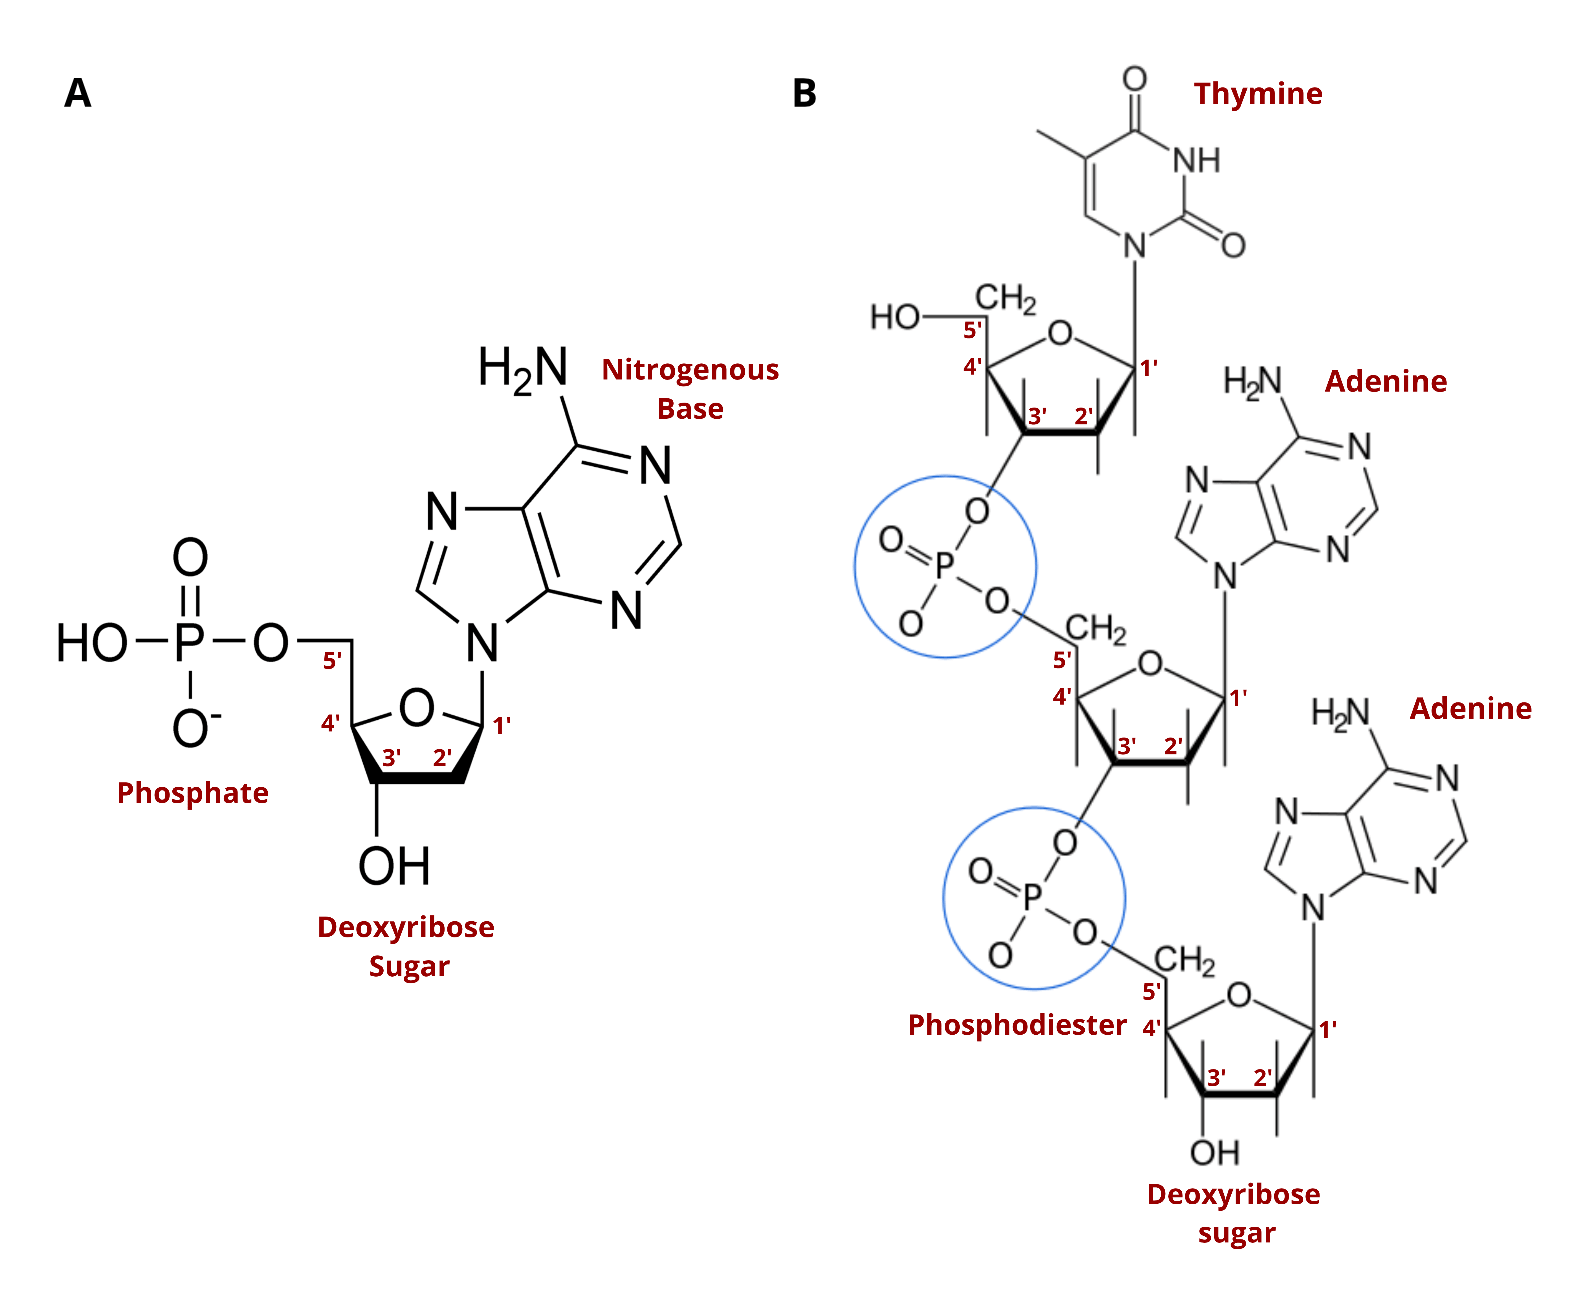 Chemical structures of both a nucleotide and an oligonucleotide.